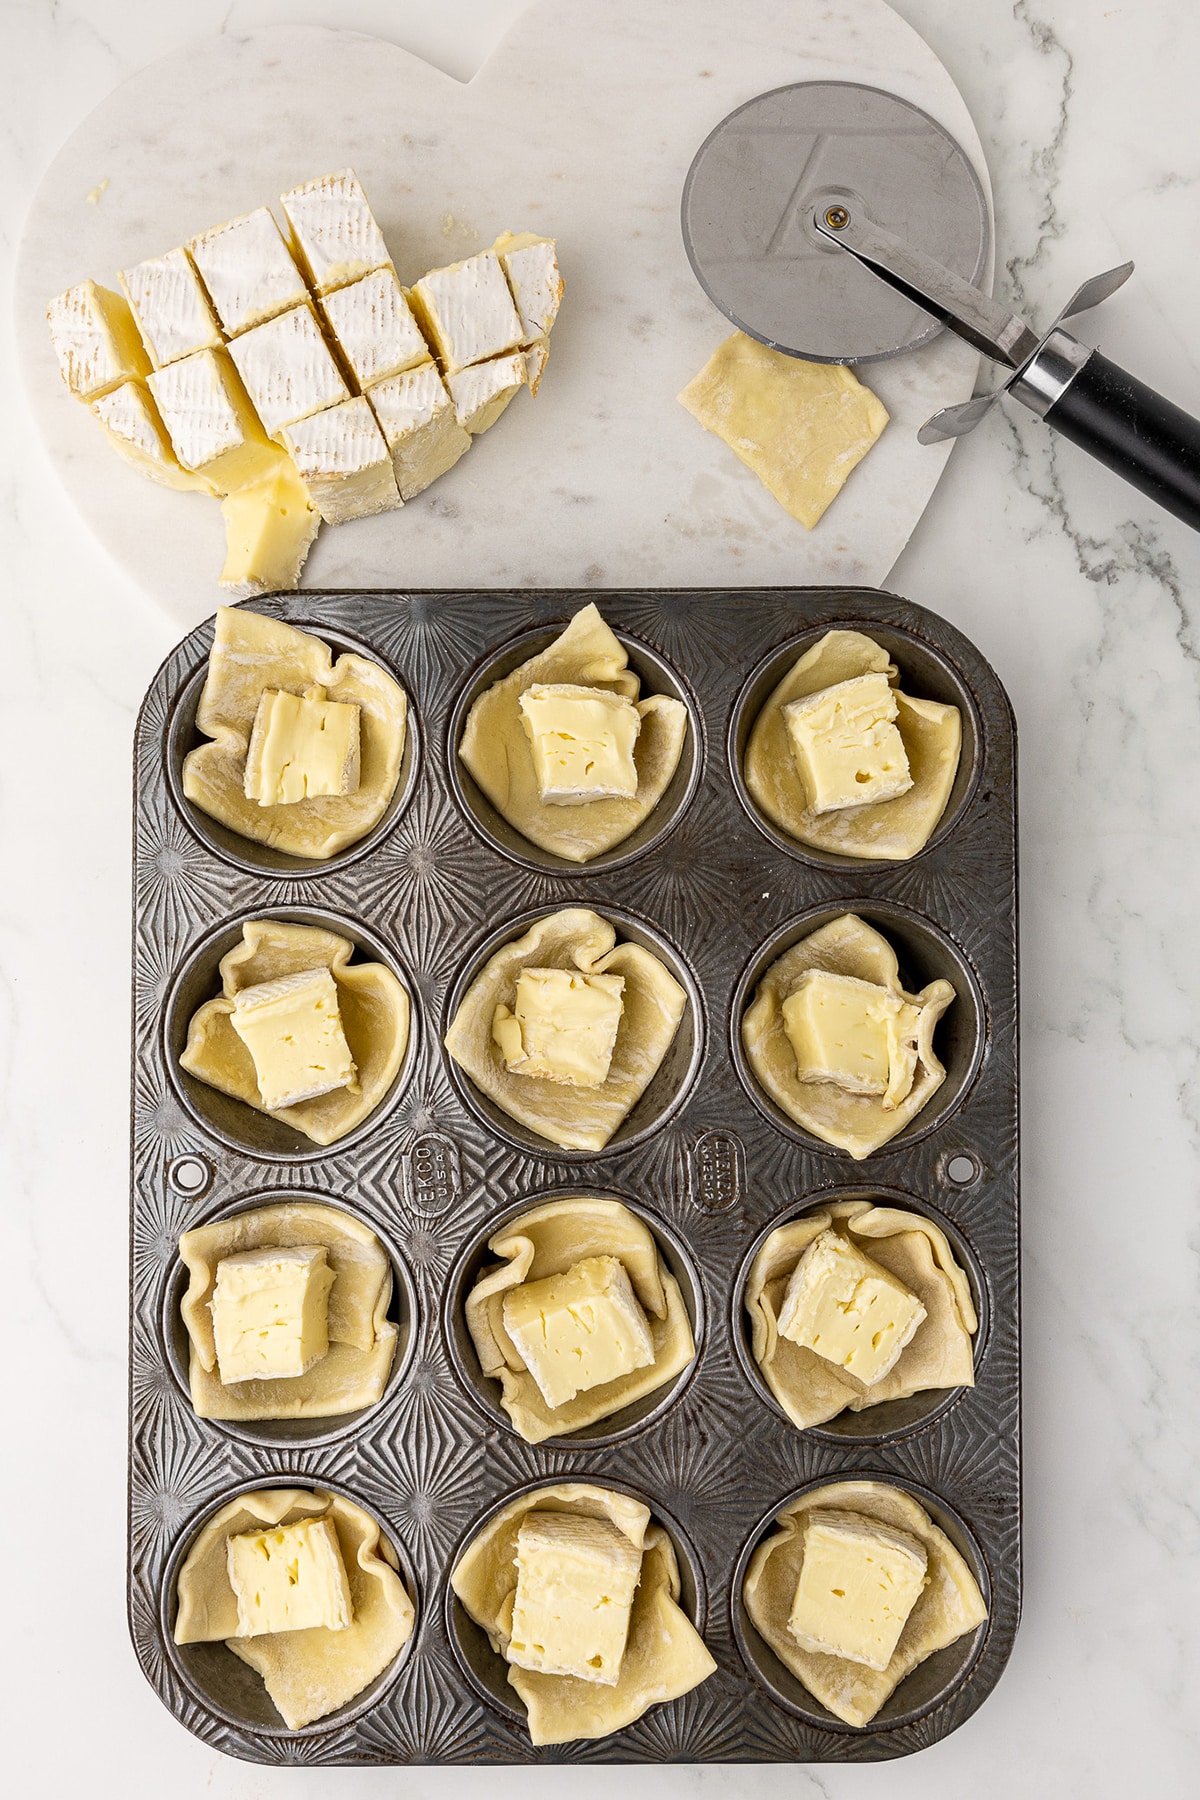 antique muffin pan on a white marble countertop with puff pastry squares and cubes of brie in each cup. Pizza cutter in the background